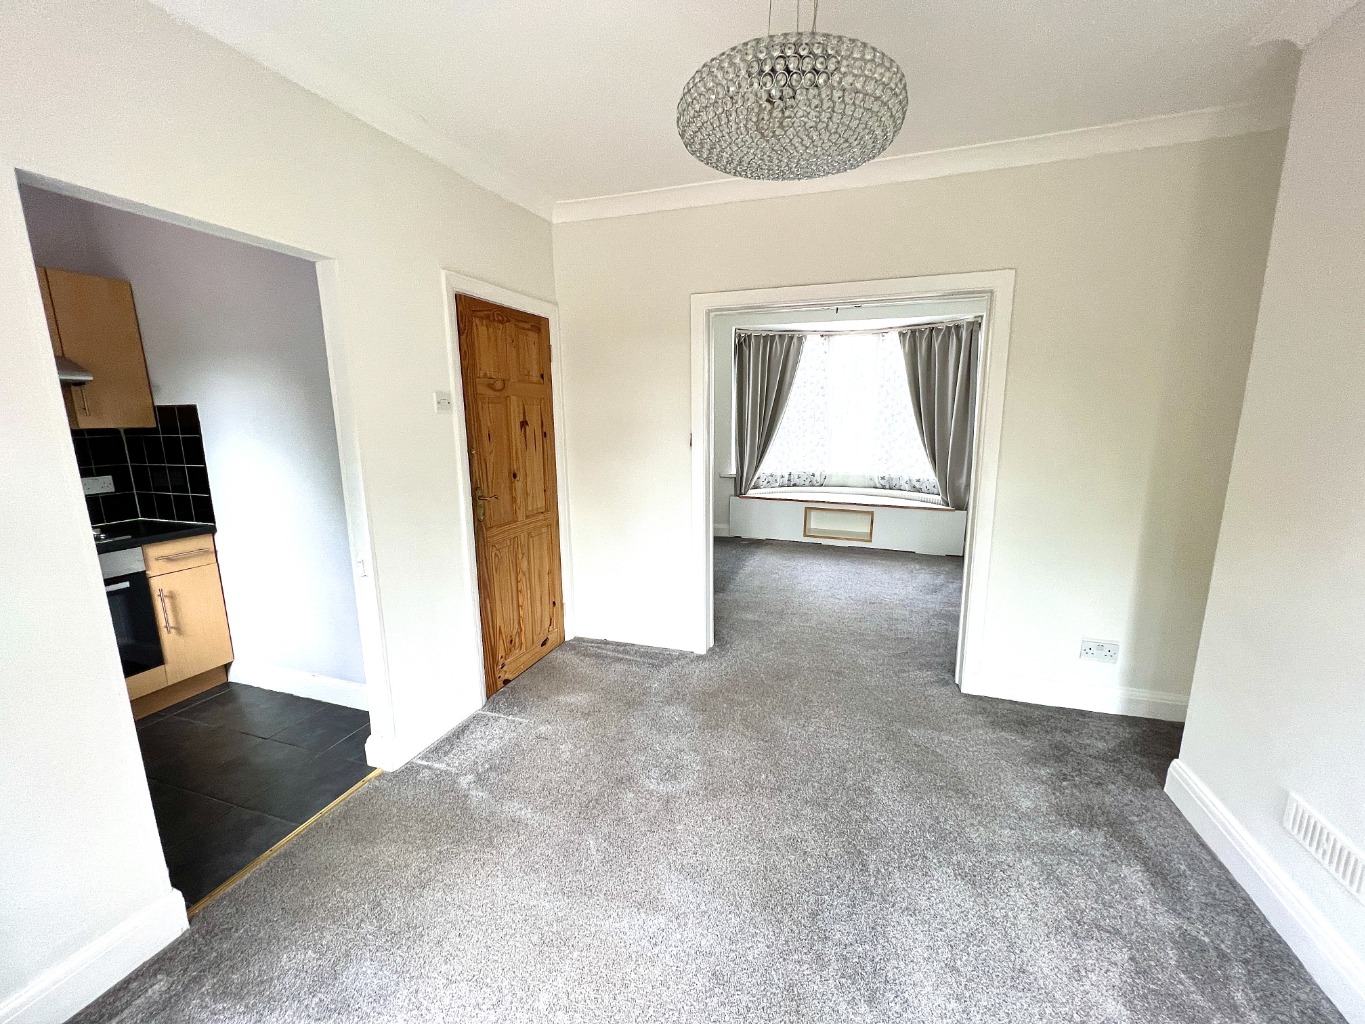 A lovely three bedroom terrace house is being offered to let by Beaumont Gibbs in Plumstead.  Situated in a very popular and residential road in the Shooters Hill slopes, the property is unfurnished apart from some white goods in the kitchen.